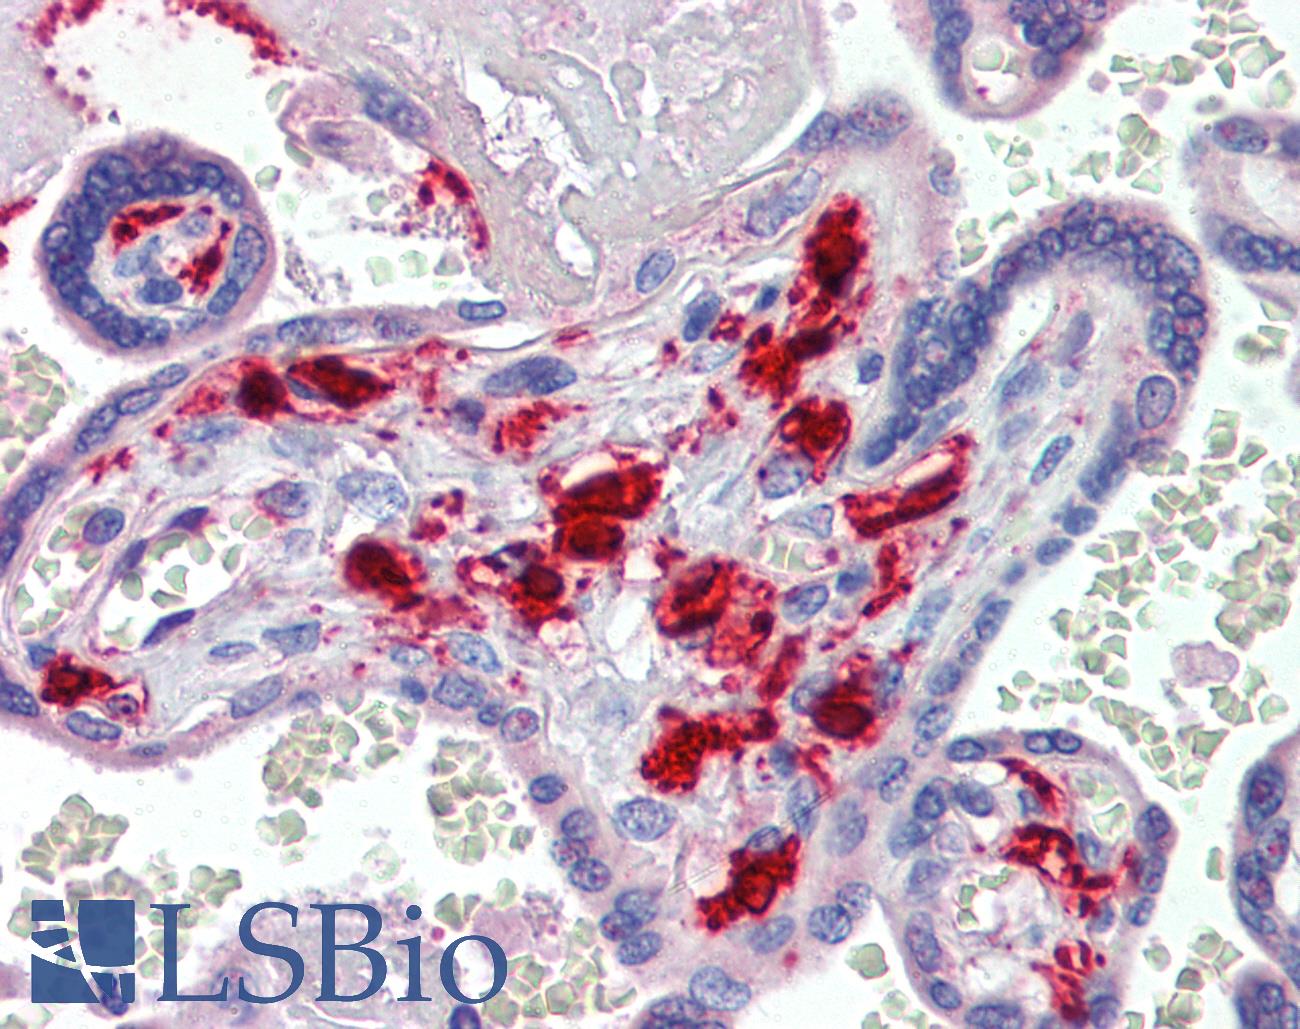 F13A1 / Factor XIIIa Antibody - Anti-F13A1 / Factor XIIIa antibody IHC of human placenta. Immunohistochemistry of formalin-fixed, paraffin-embedded tissue after heat-induced antigen retrieval. Antibody concentration 3 ug/ml.